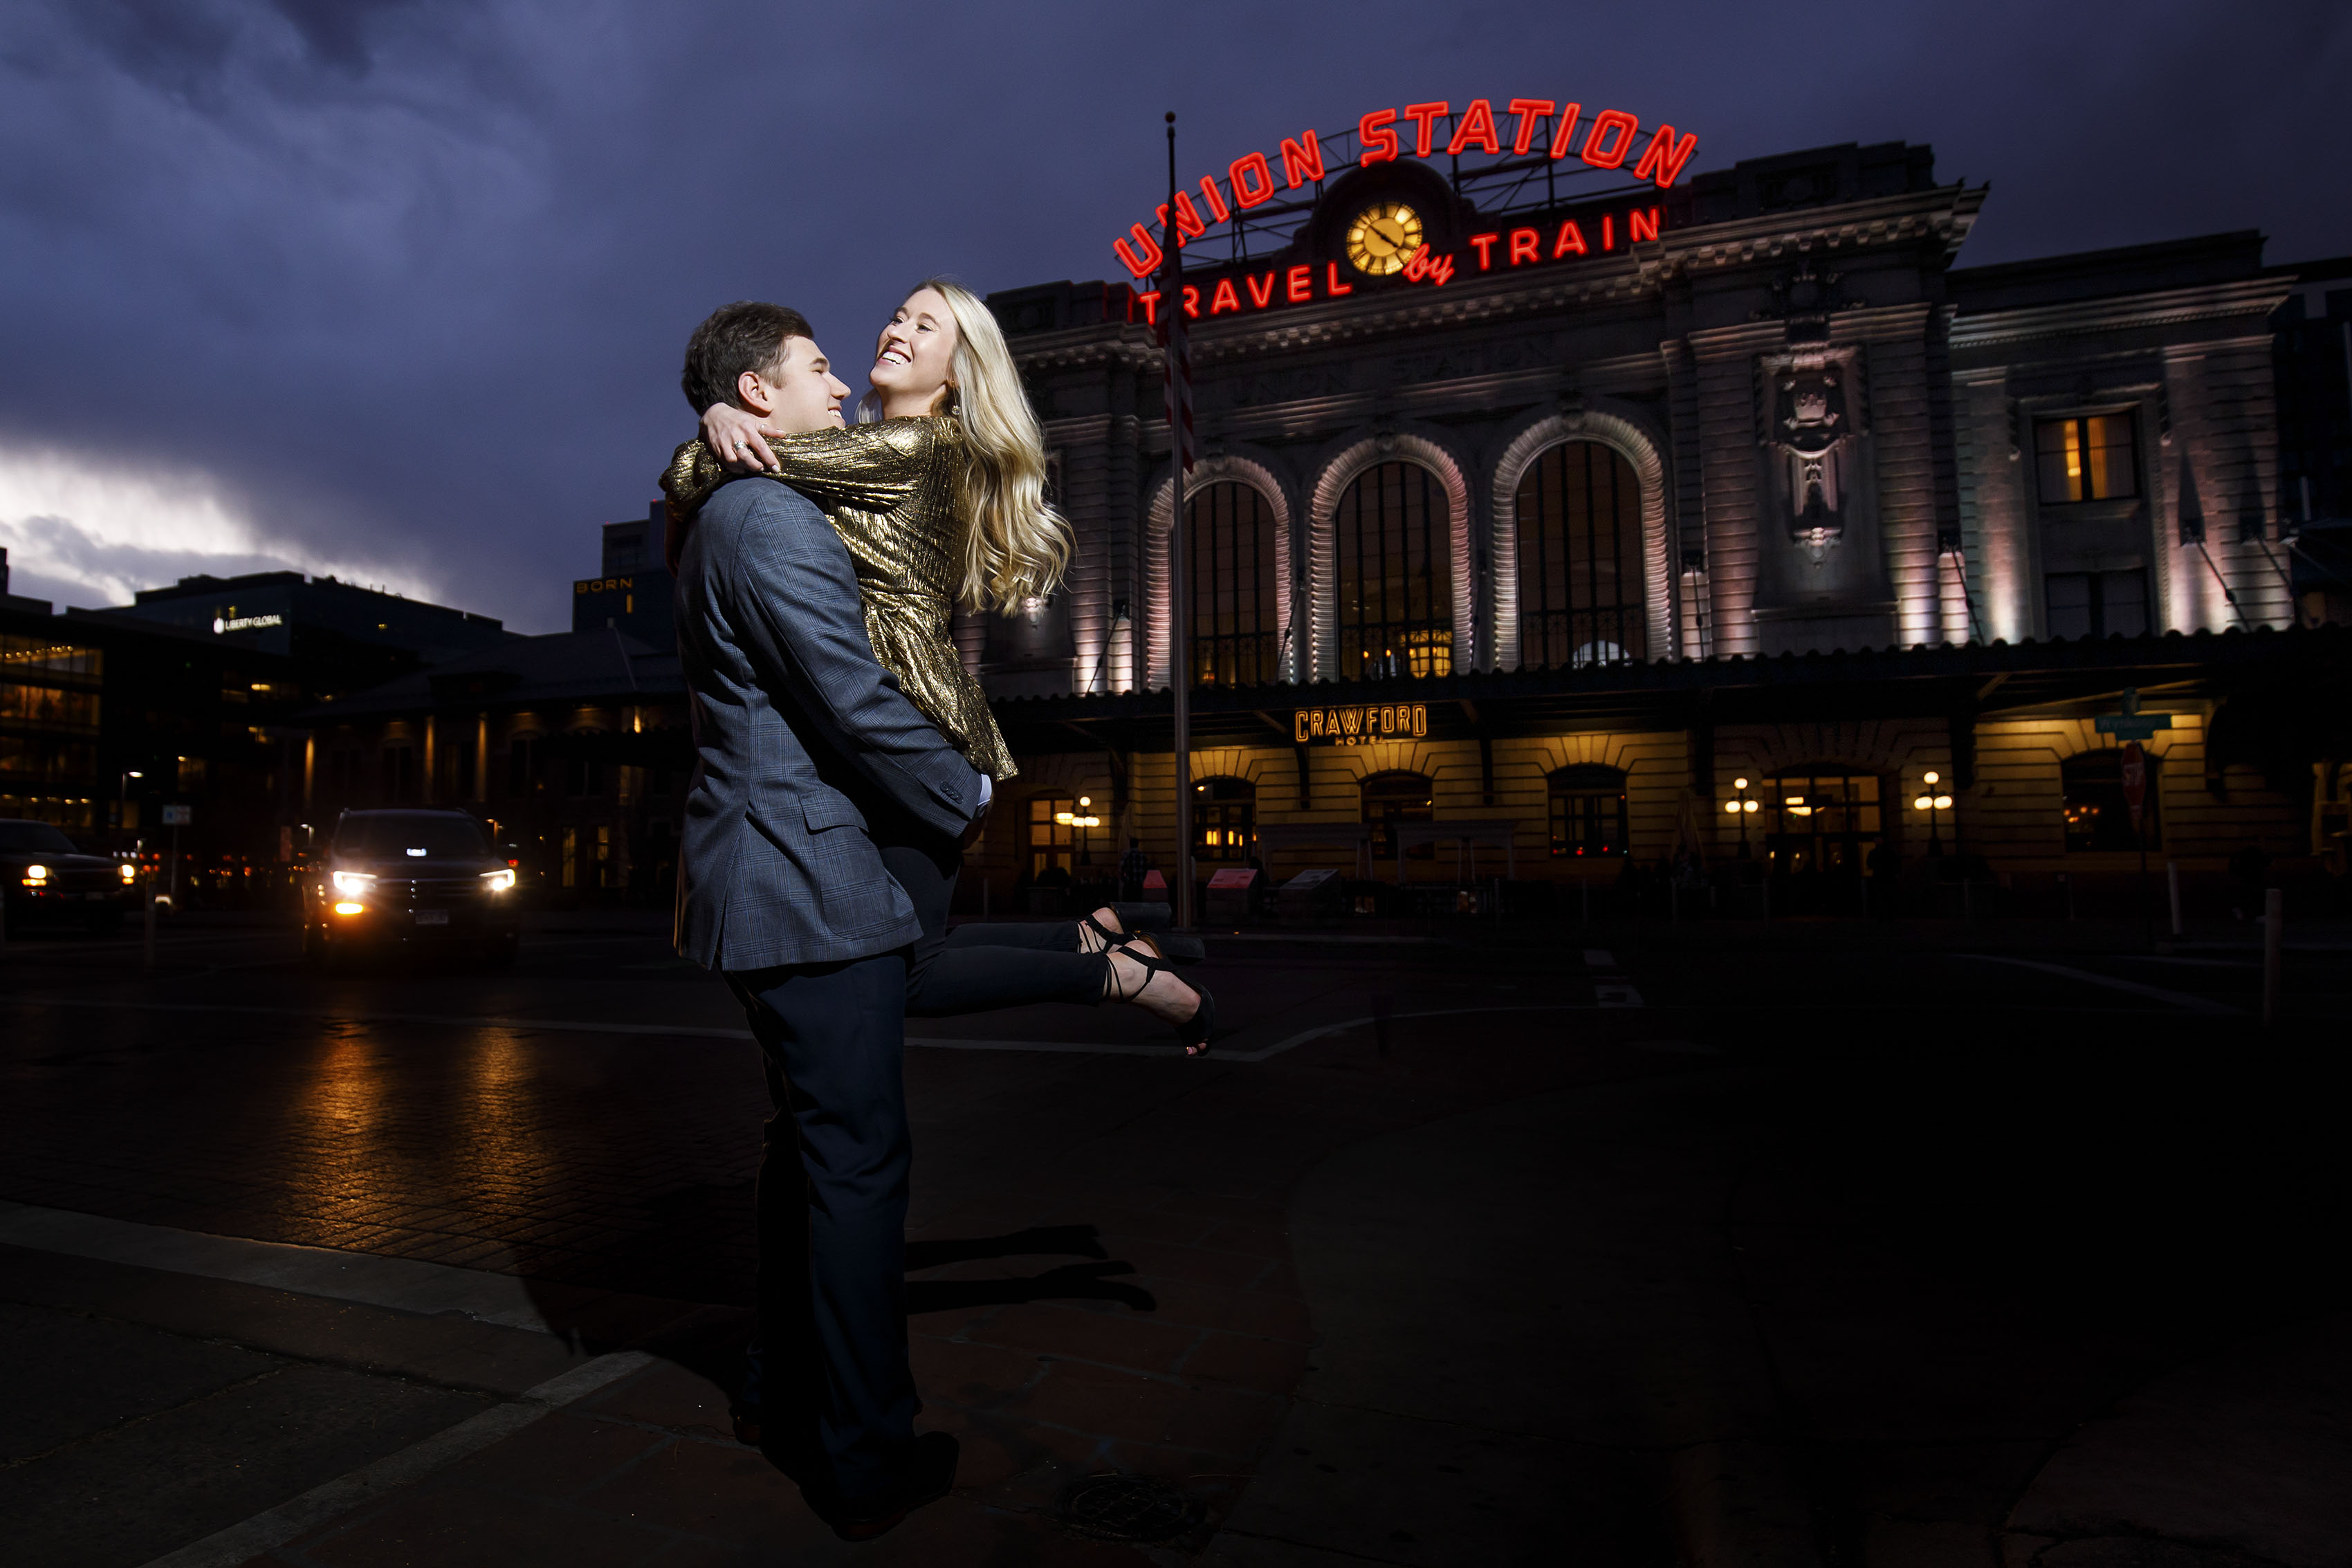 Alex picks up Sierra as they celbrate after Alex proposed outside Denver's Union Station